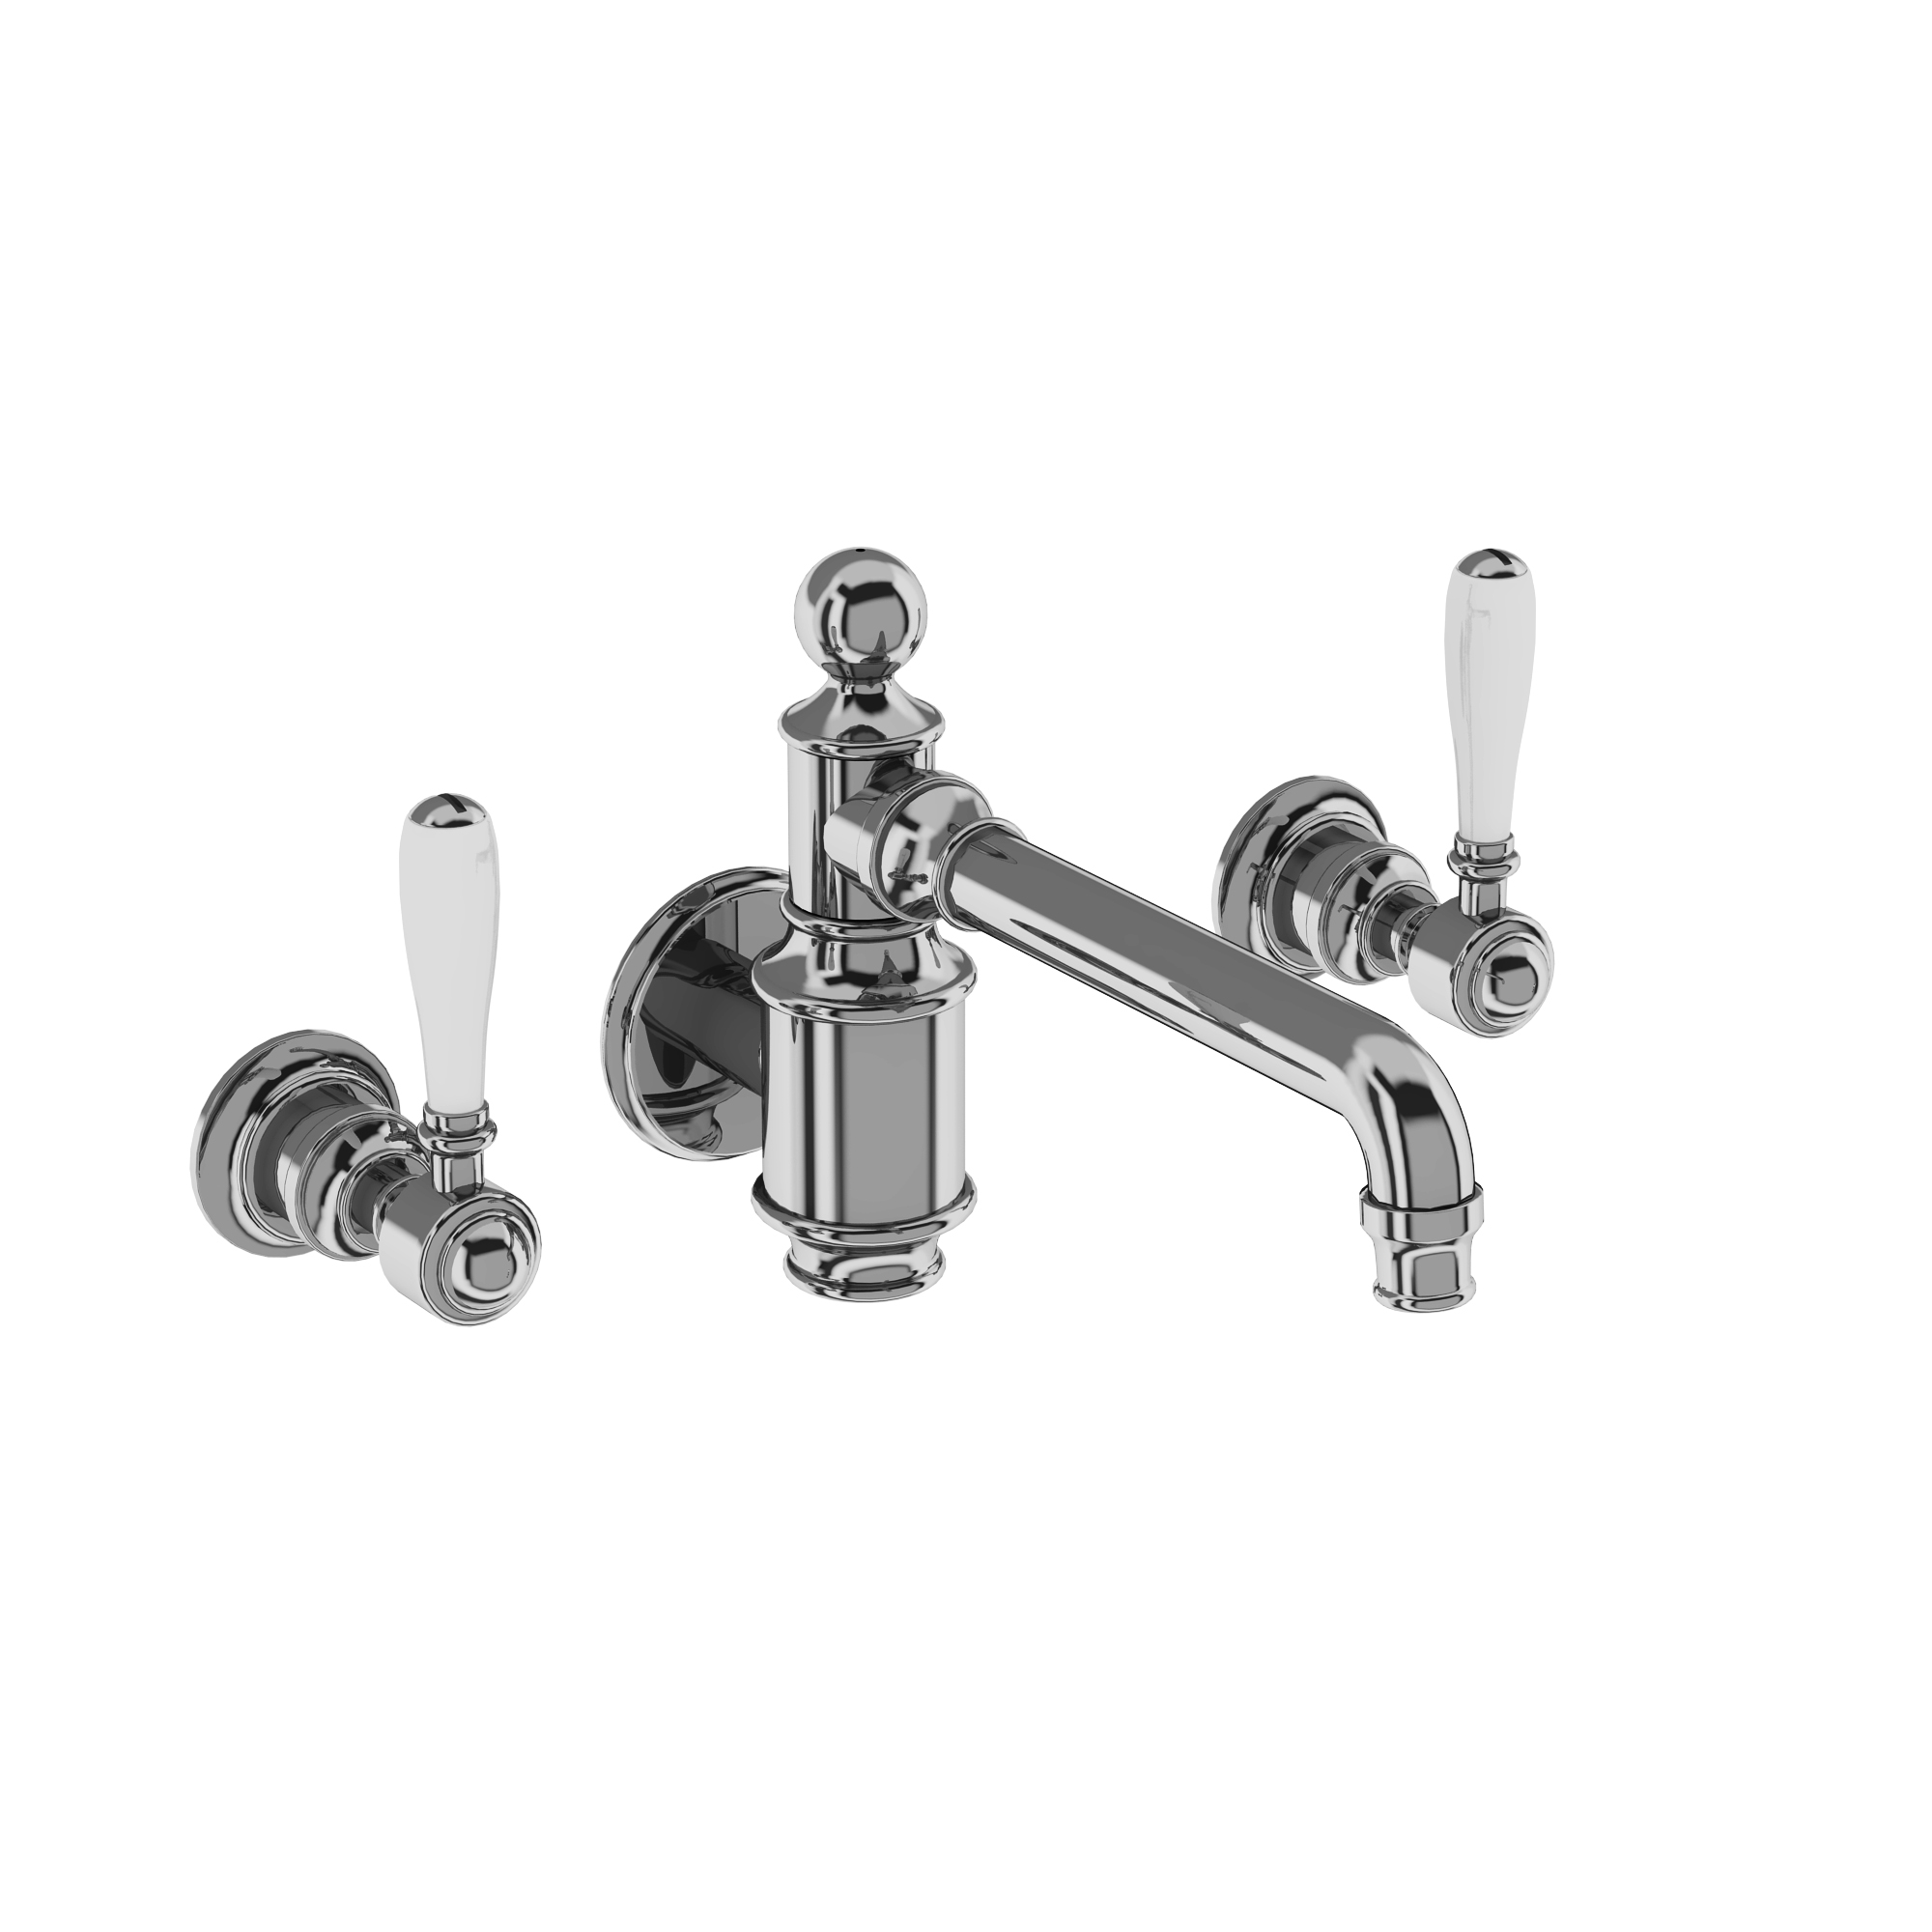 Arcade Three hole basin mixer wall-mounted without pop up waste - chrome - with ceramic lever